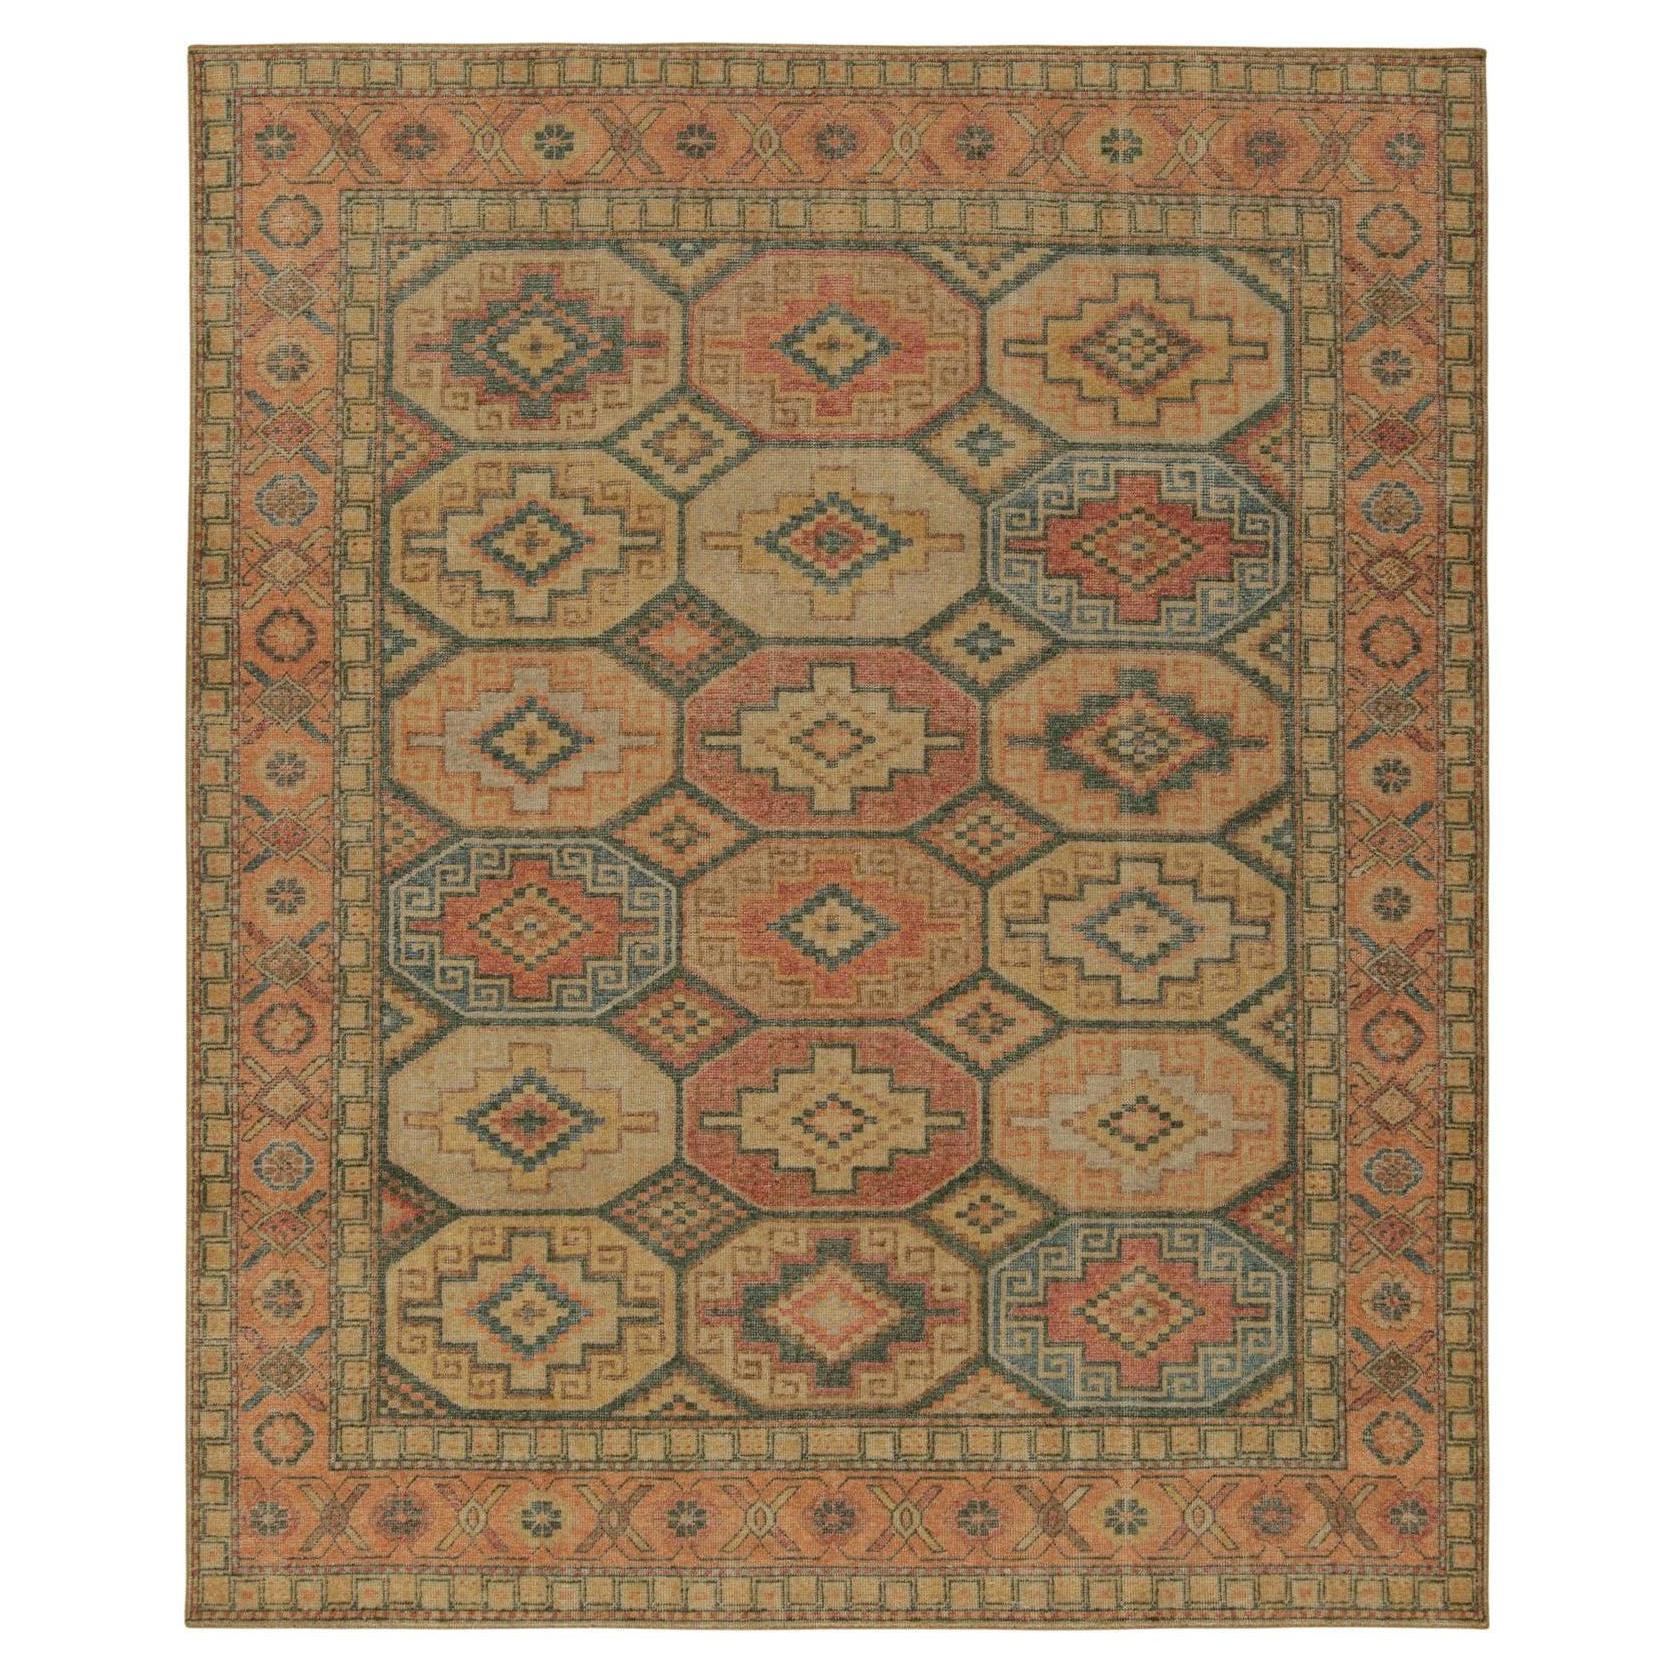 Rug & Kilim’s Distressed Persian Style Rug in Orange, Beige and Blue Medallions